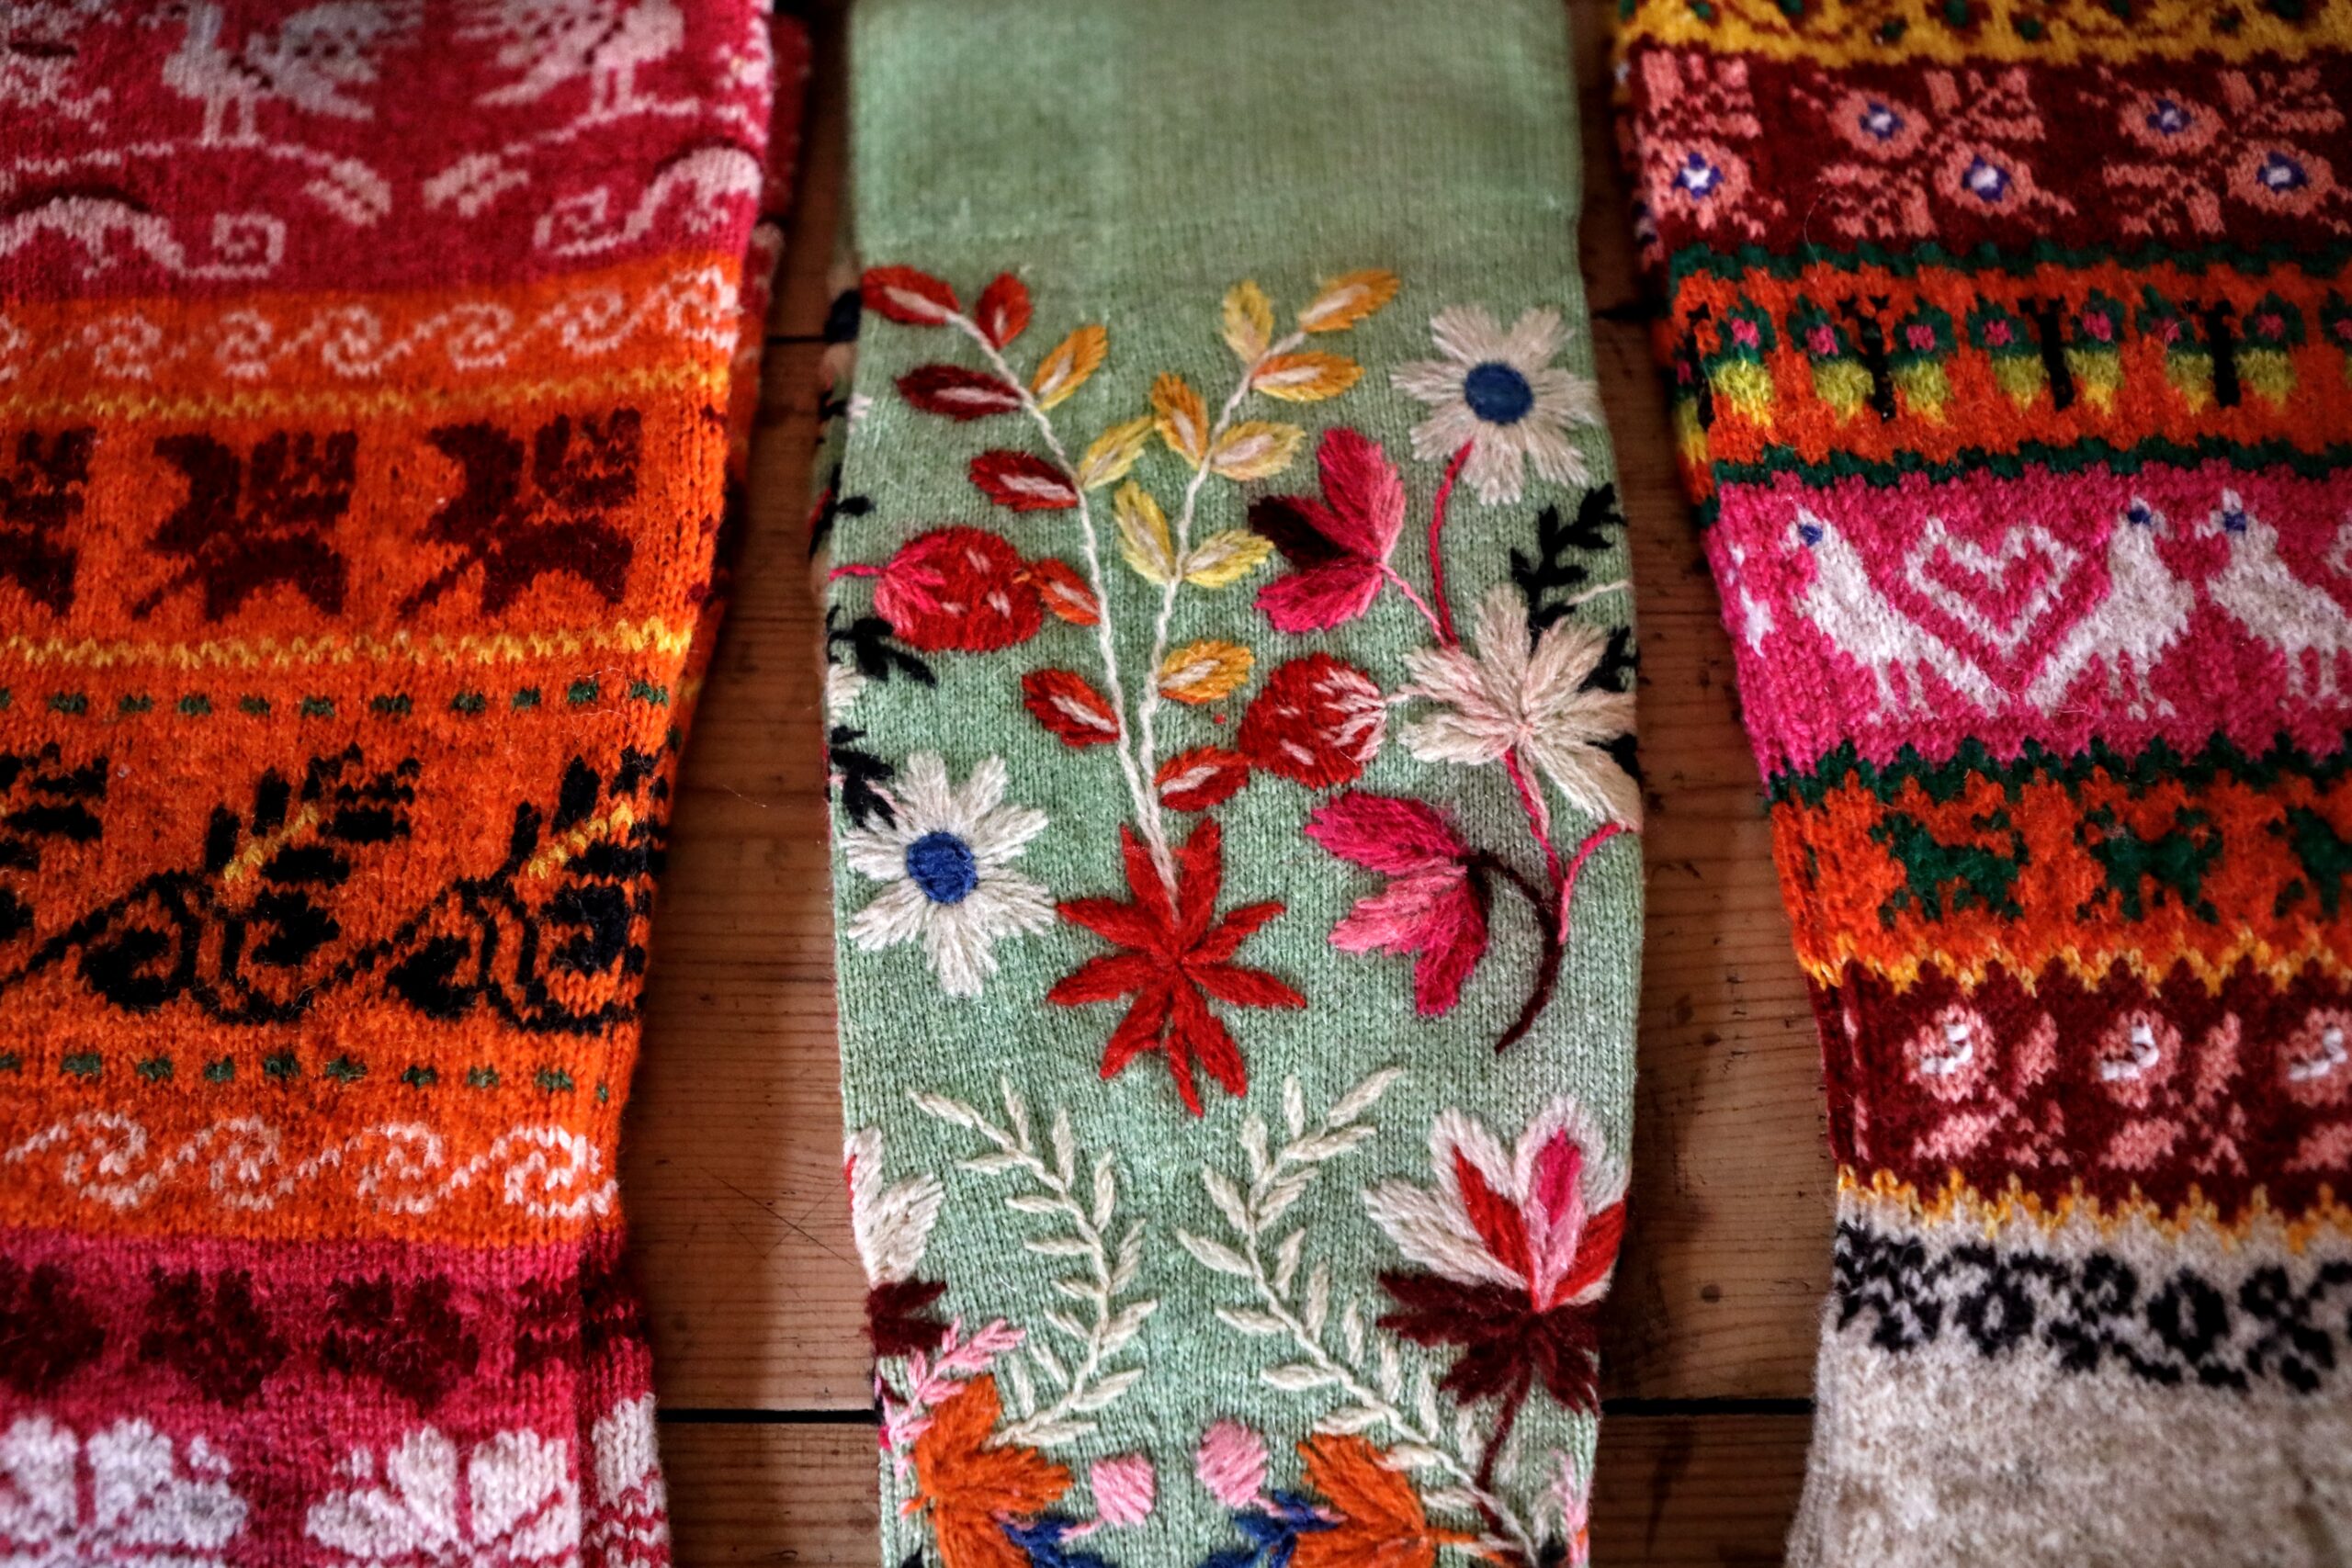 In addition to plant motifs, stocking patterns also contain humorous depictions of coastal life and fauna. Thus, you can find rows of flies, sailing boats, anchors, cockerels, peacocks, goats, kittens and other such on stockings.